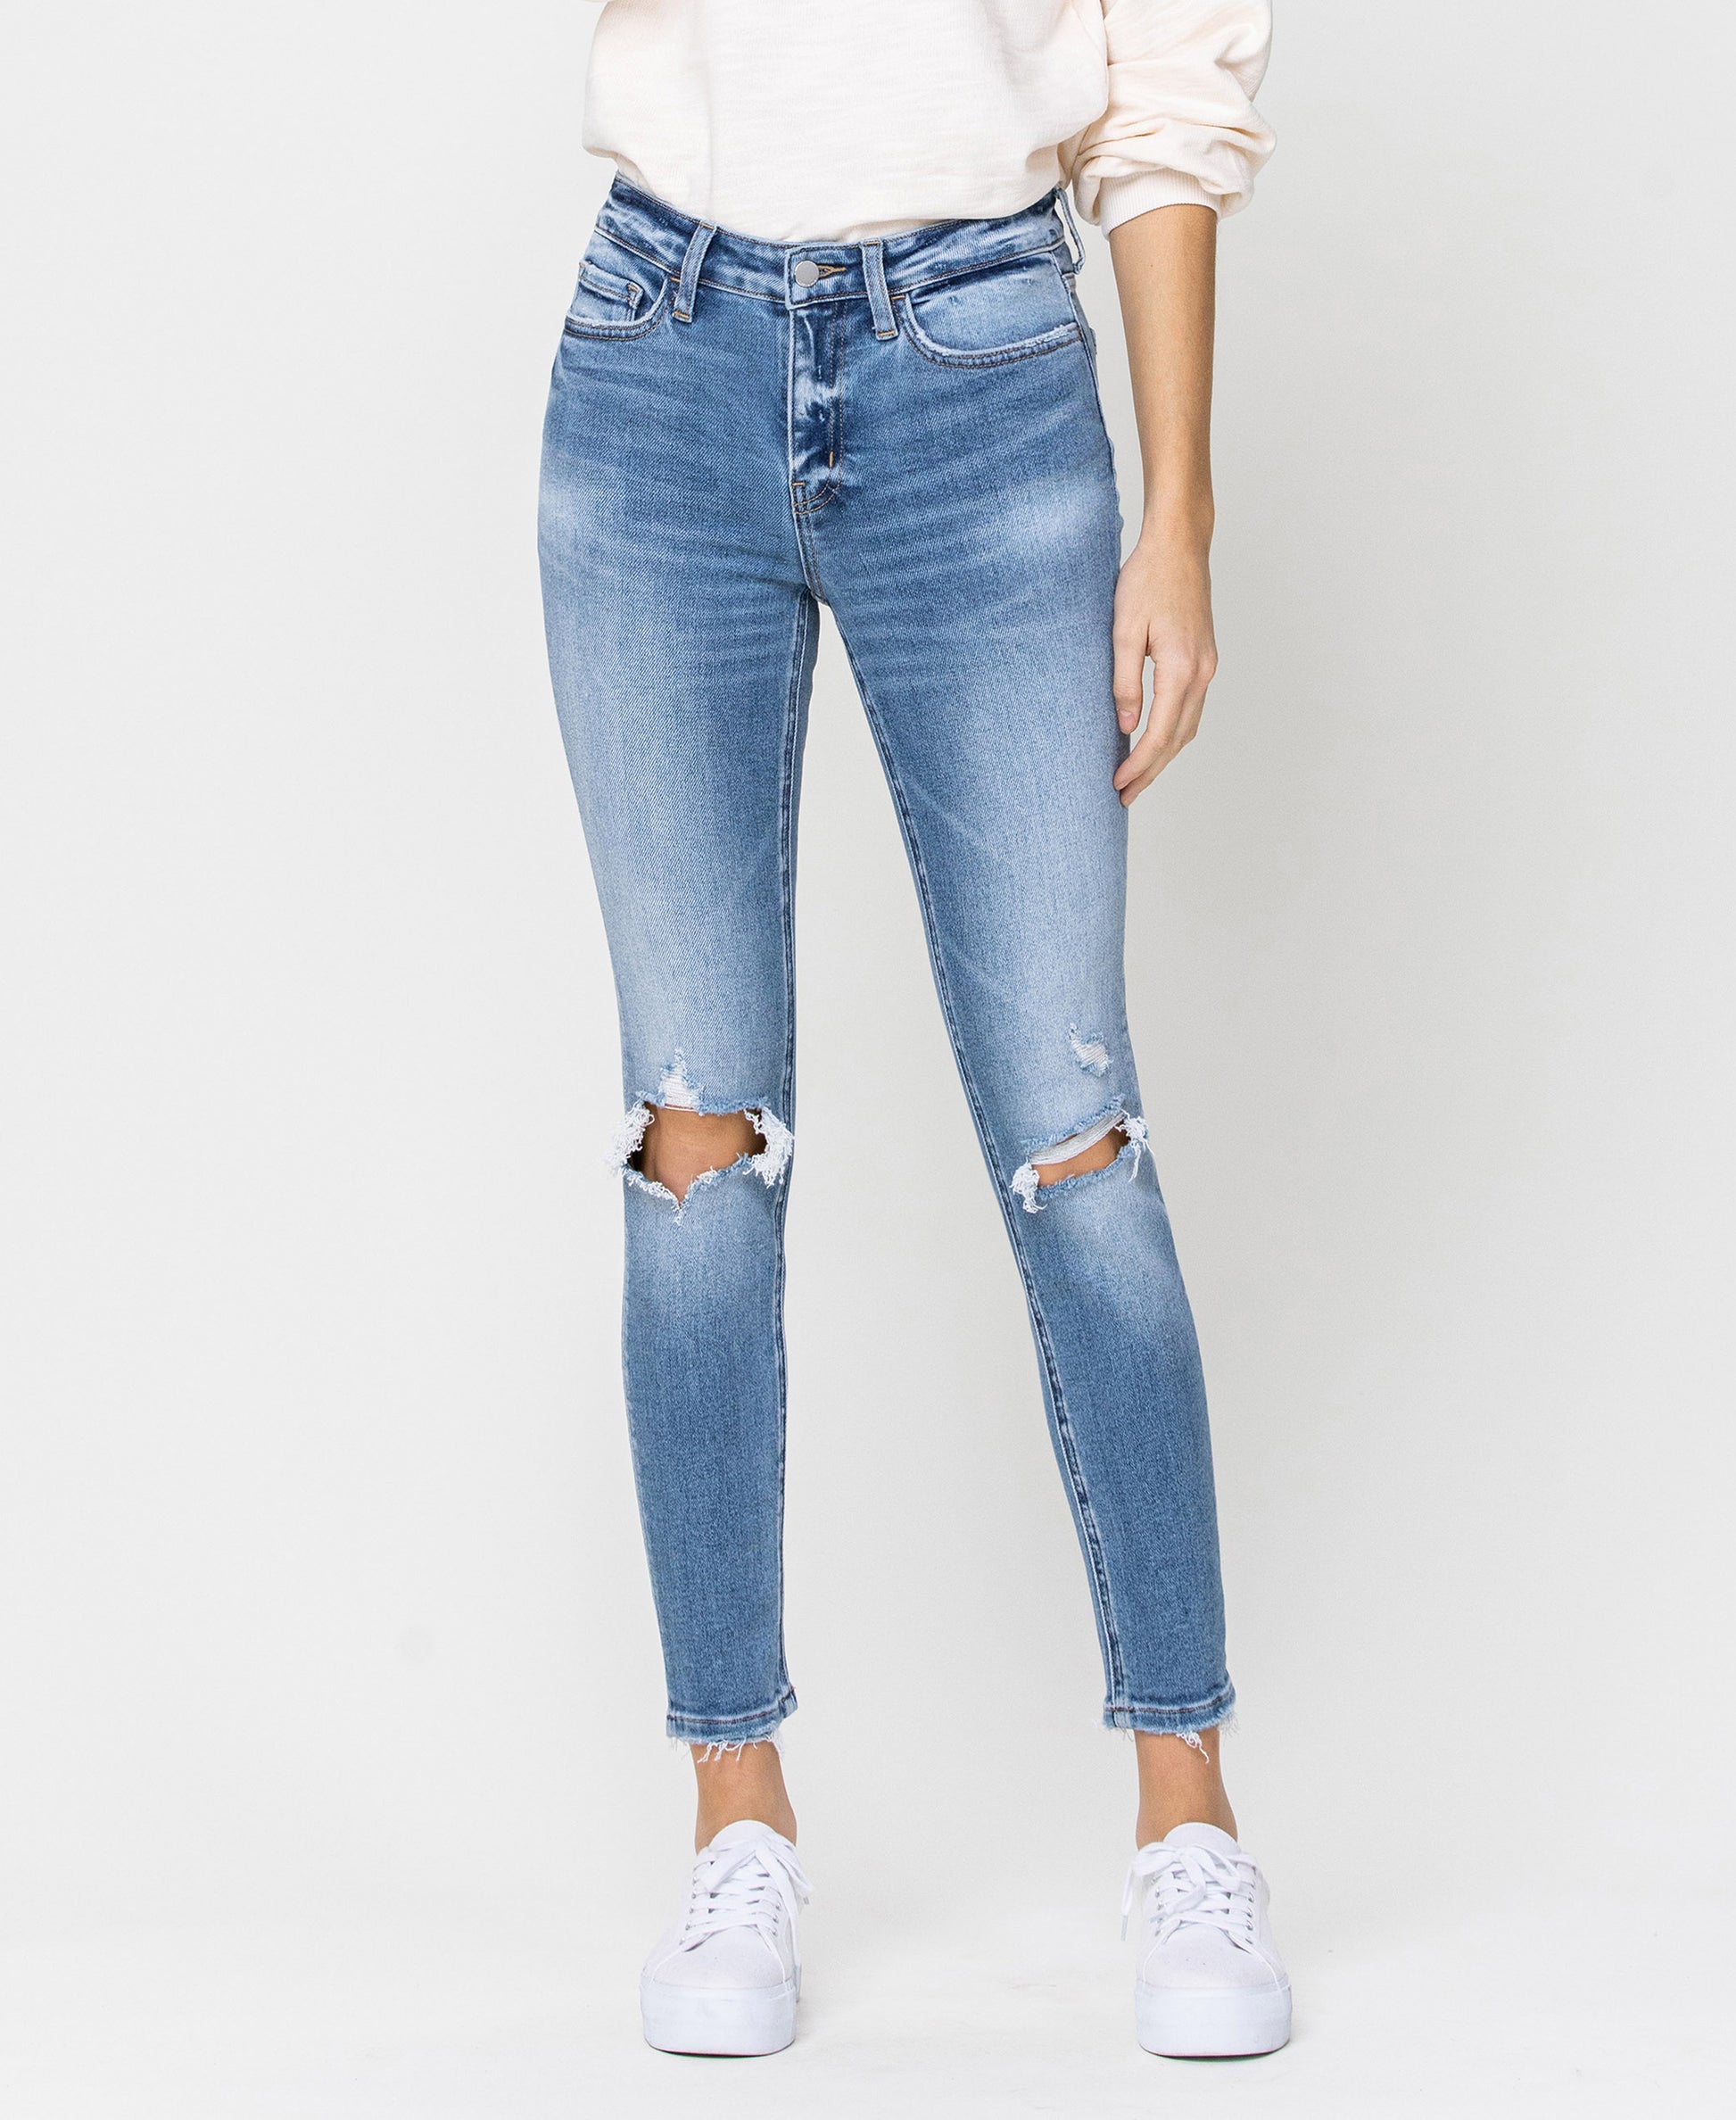 Front product images of Distressed Tempo - Mid Rise Distressed Ankle Skinny Jeans